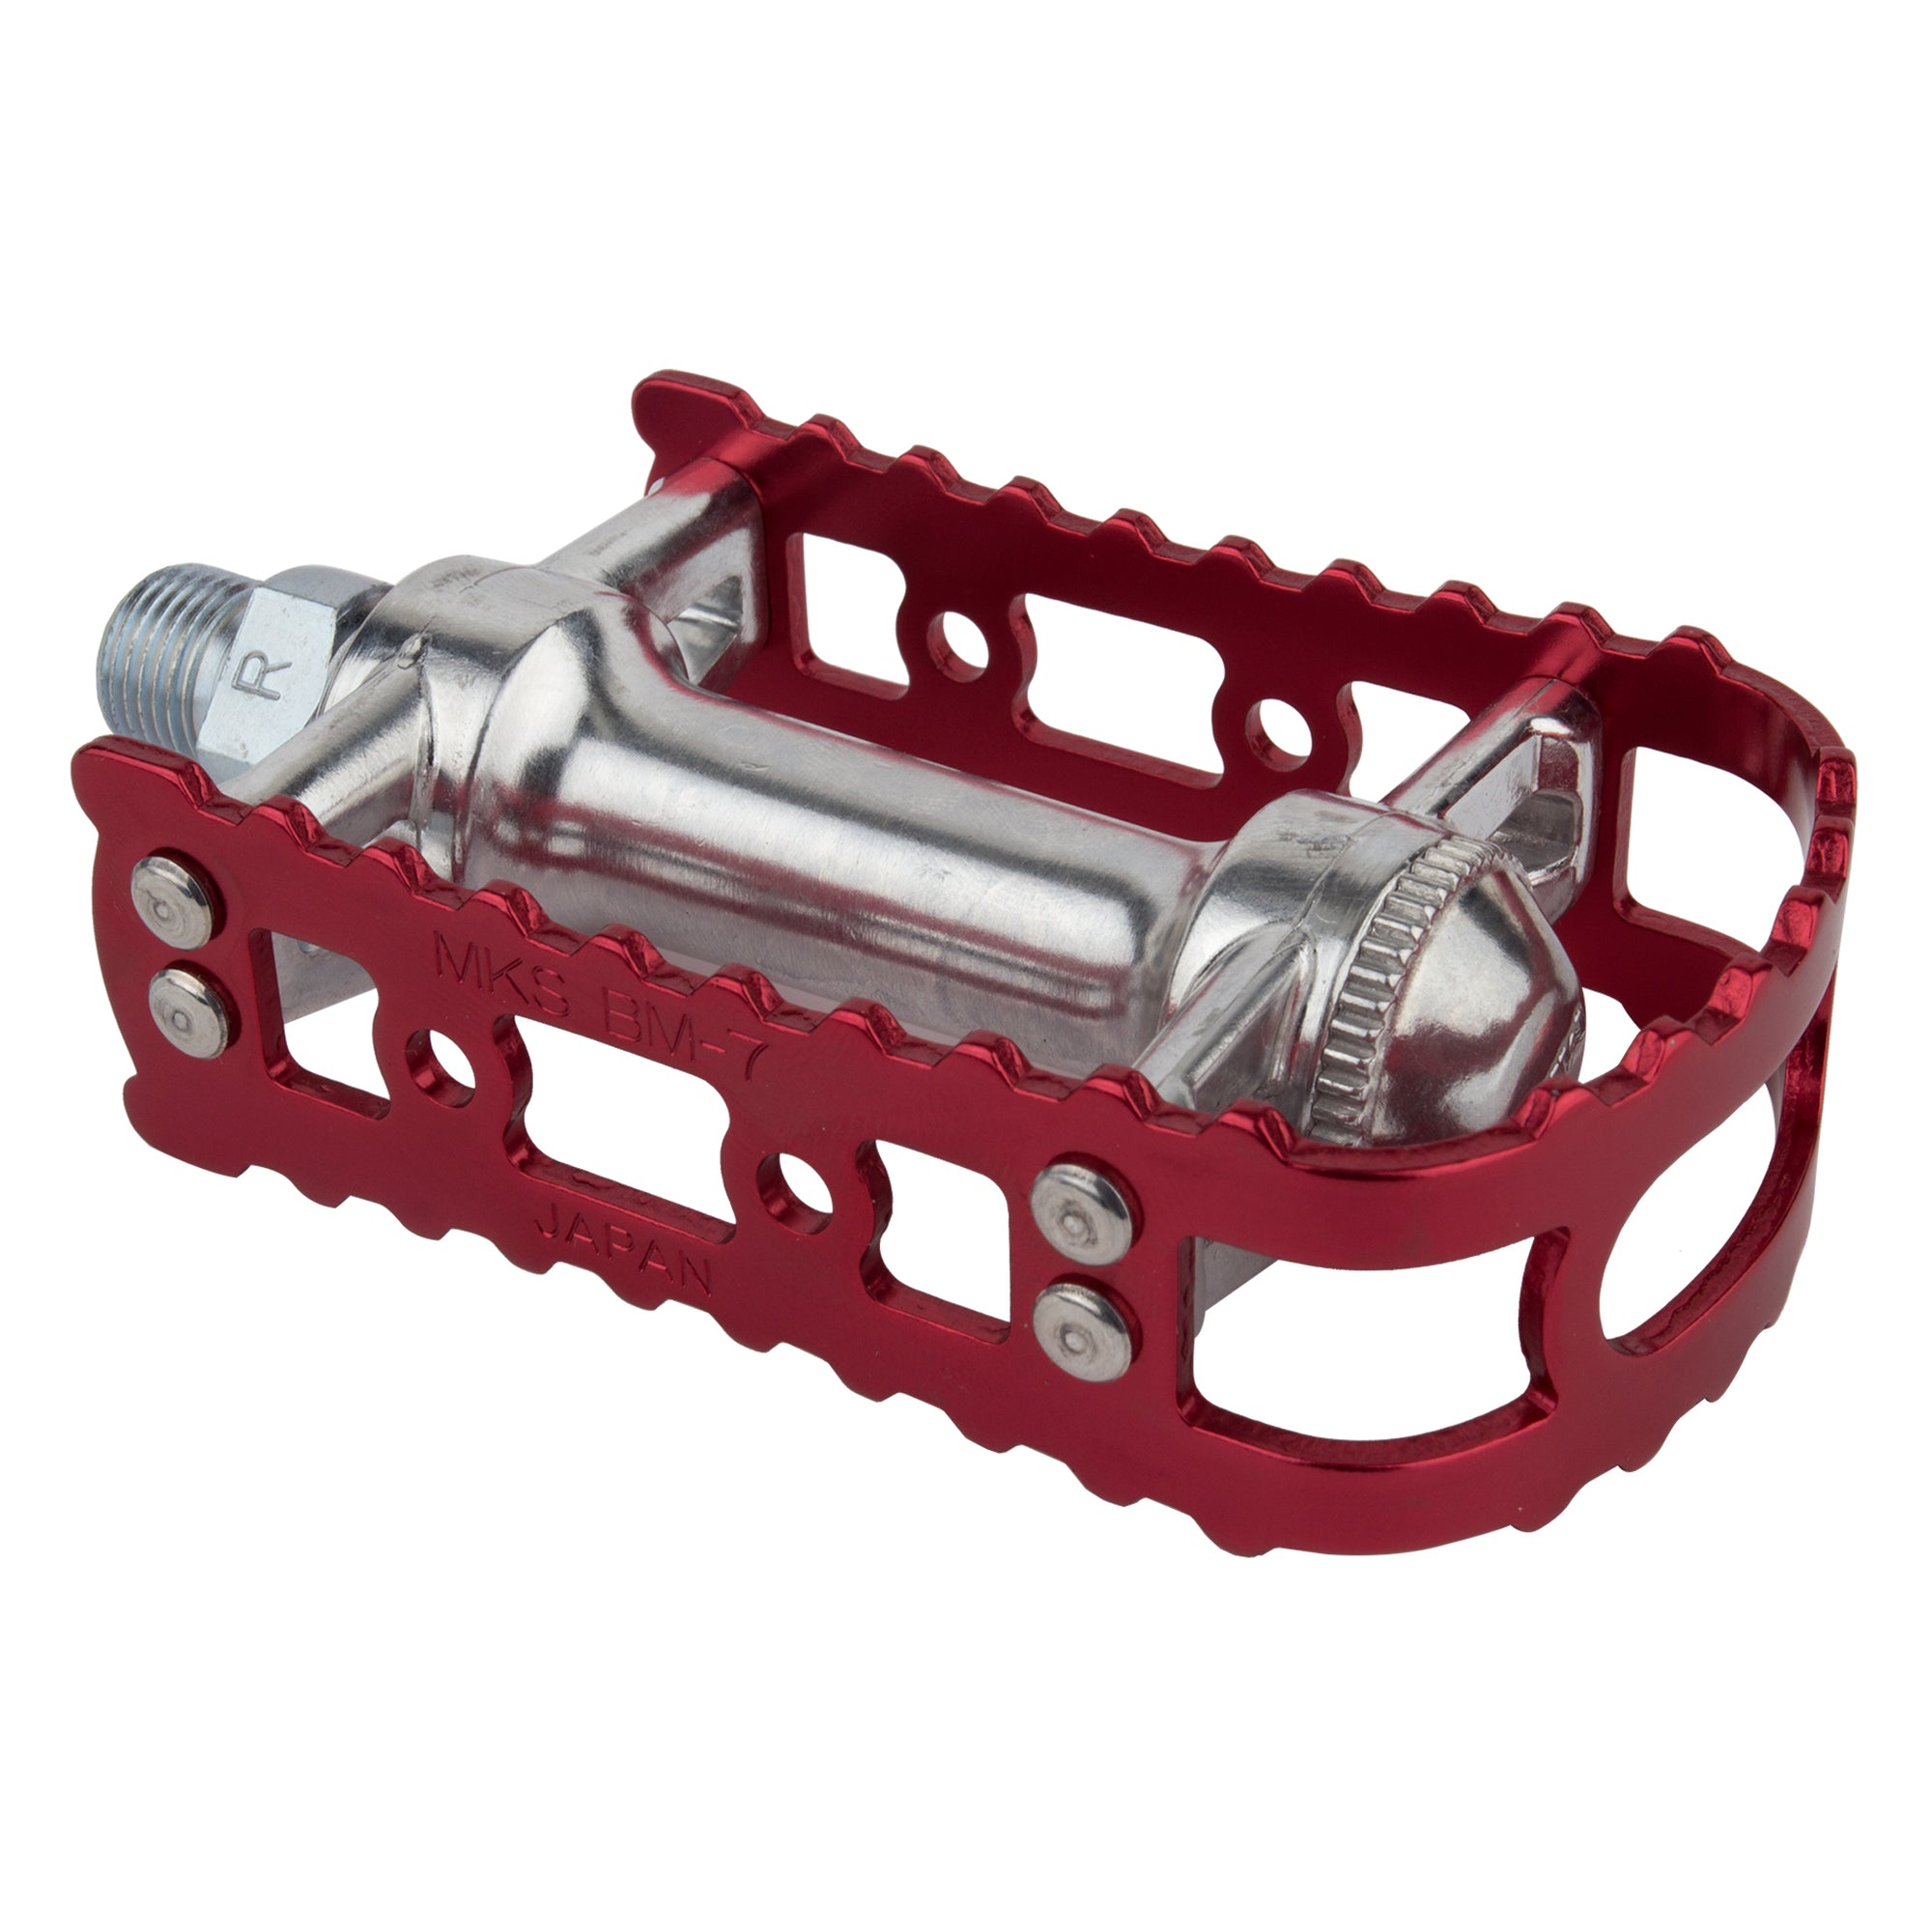 MKS BM-7 BMX Cage Pedals - 9/16" - Red Anodized